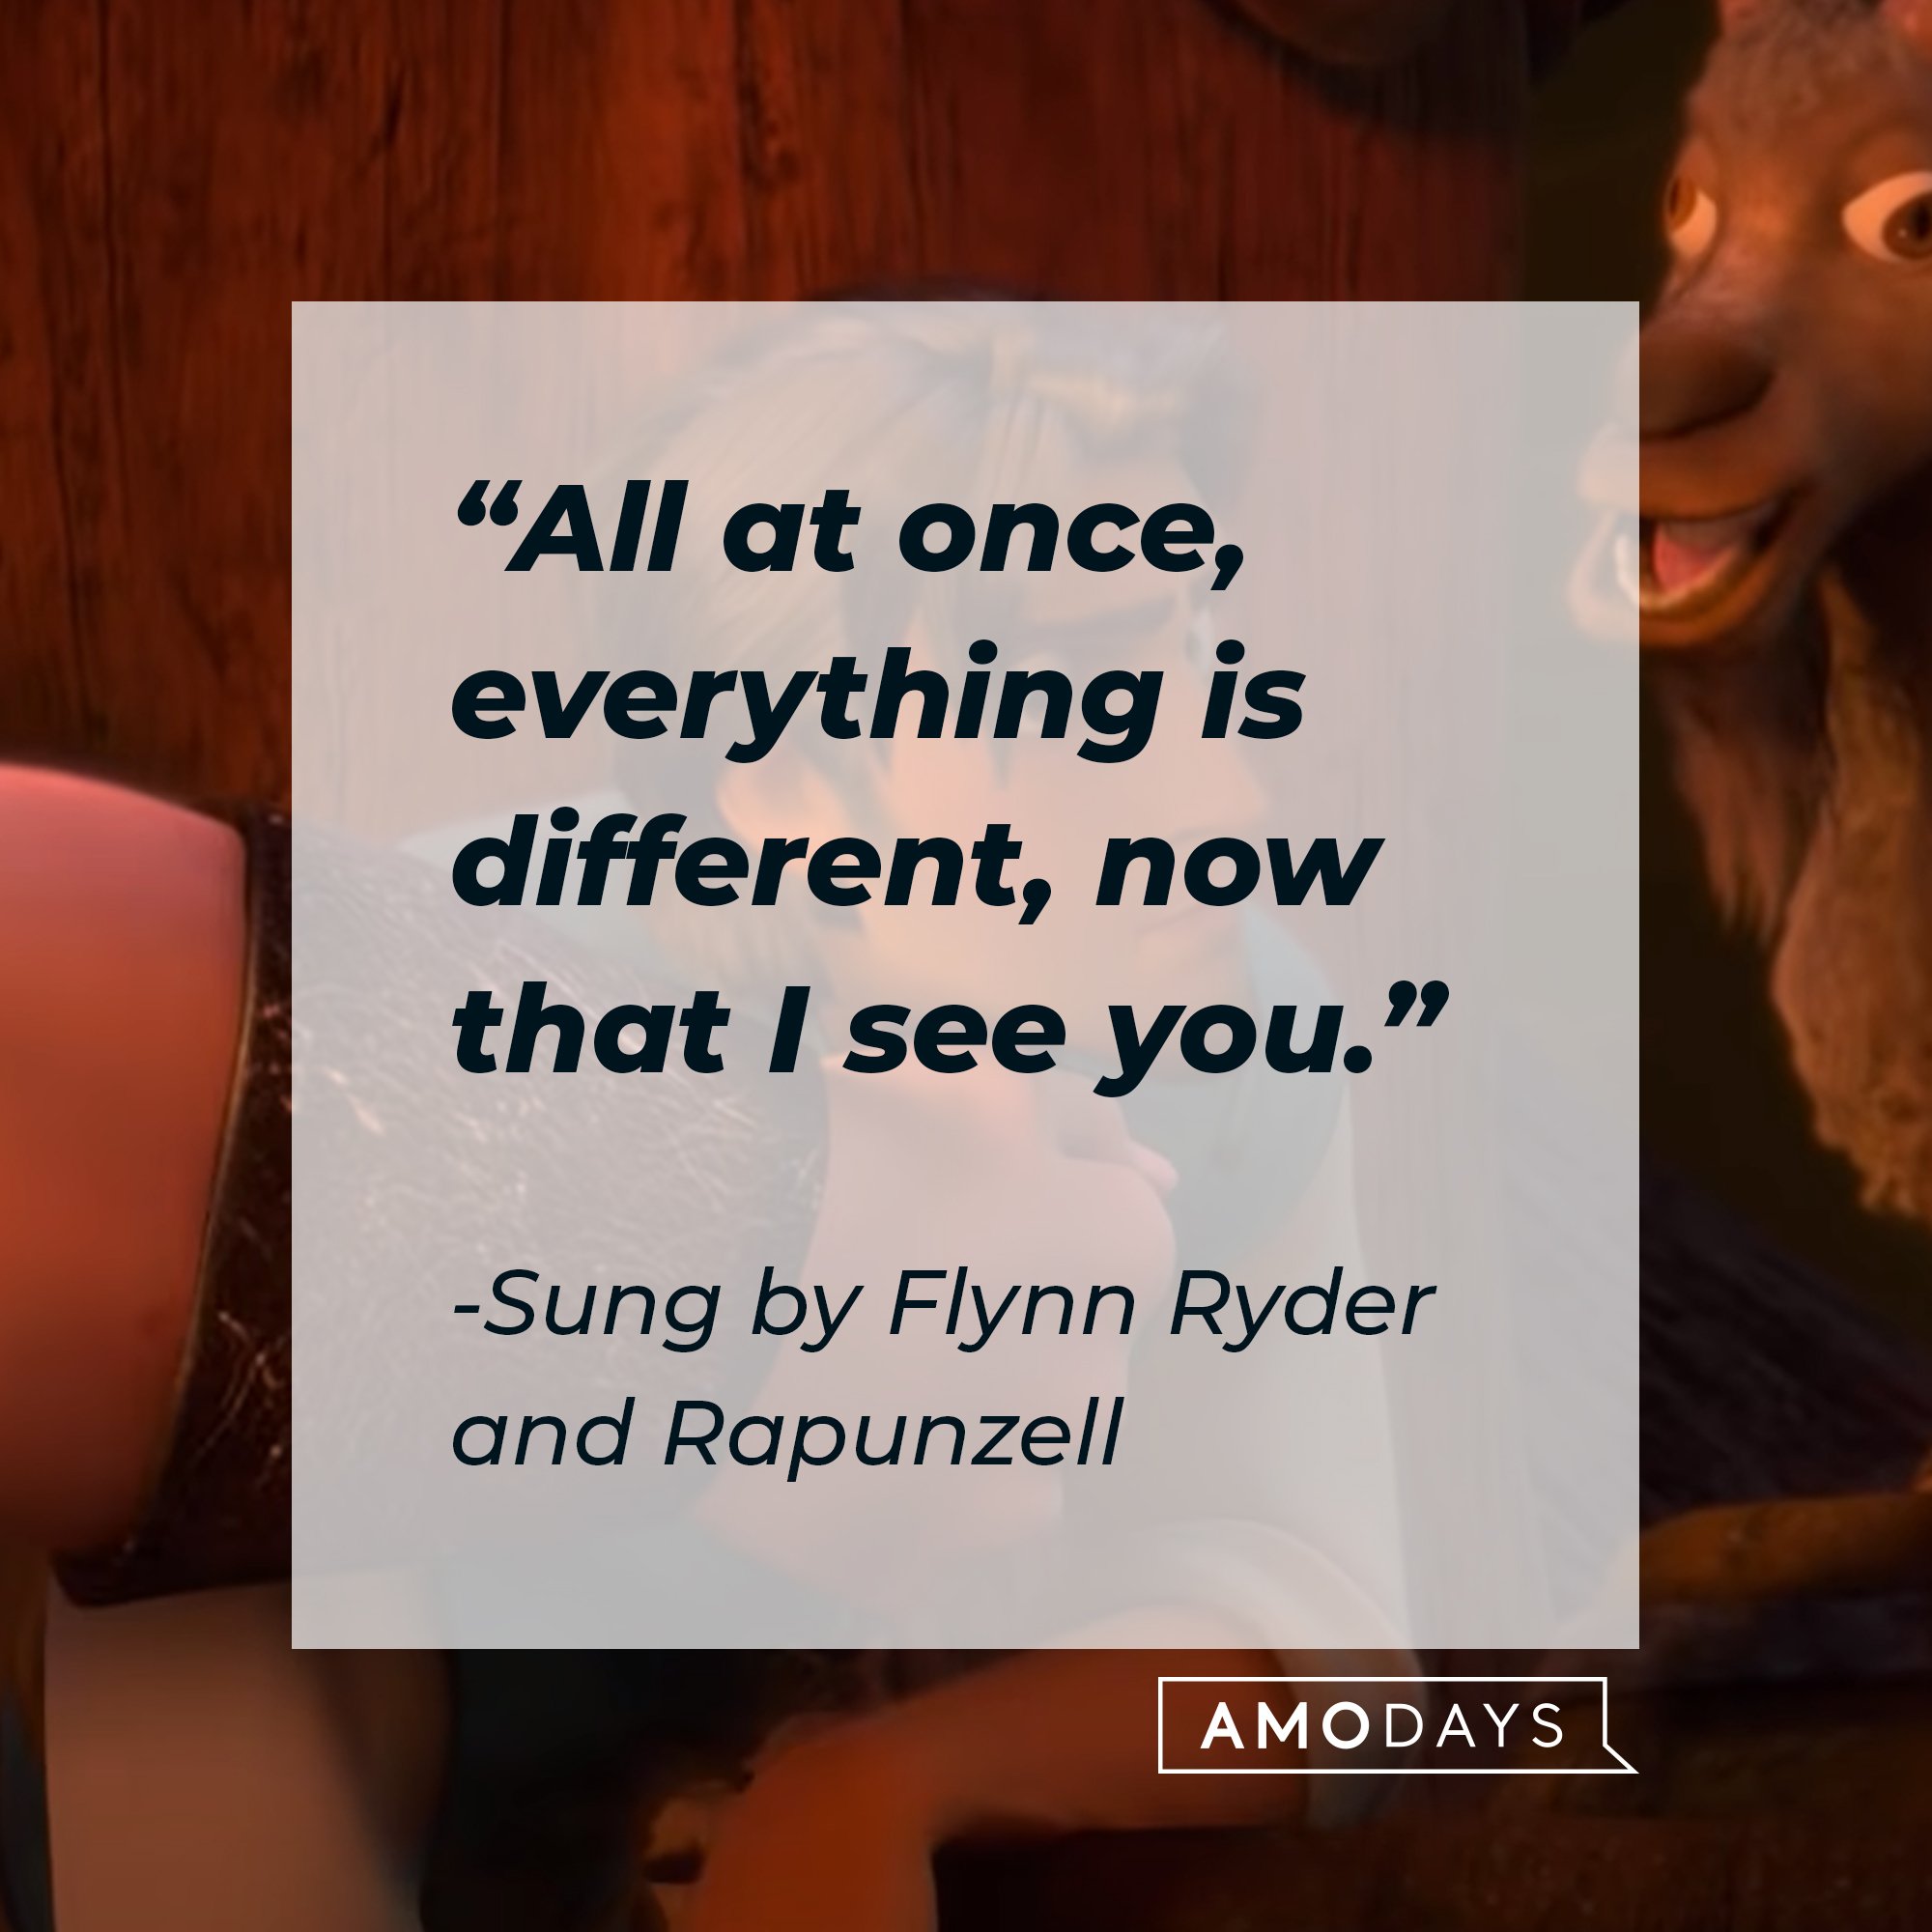 Flynn Ryder and Rapunzel's quote: "All at once, everything is different, now that I see you." | Image: AmoDays